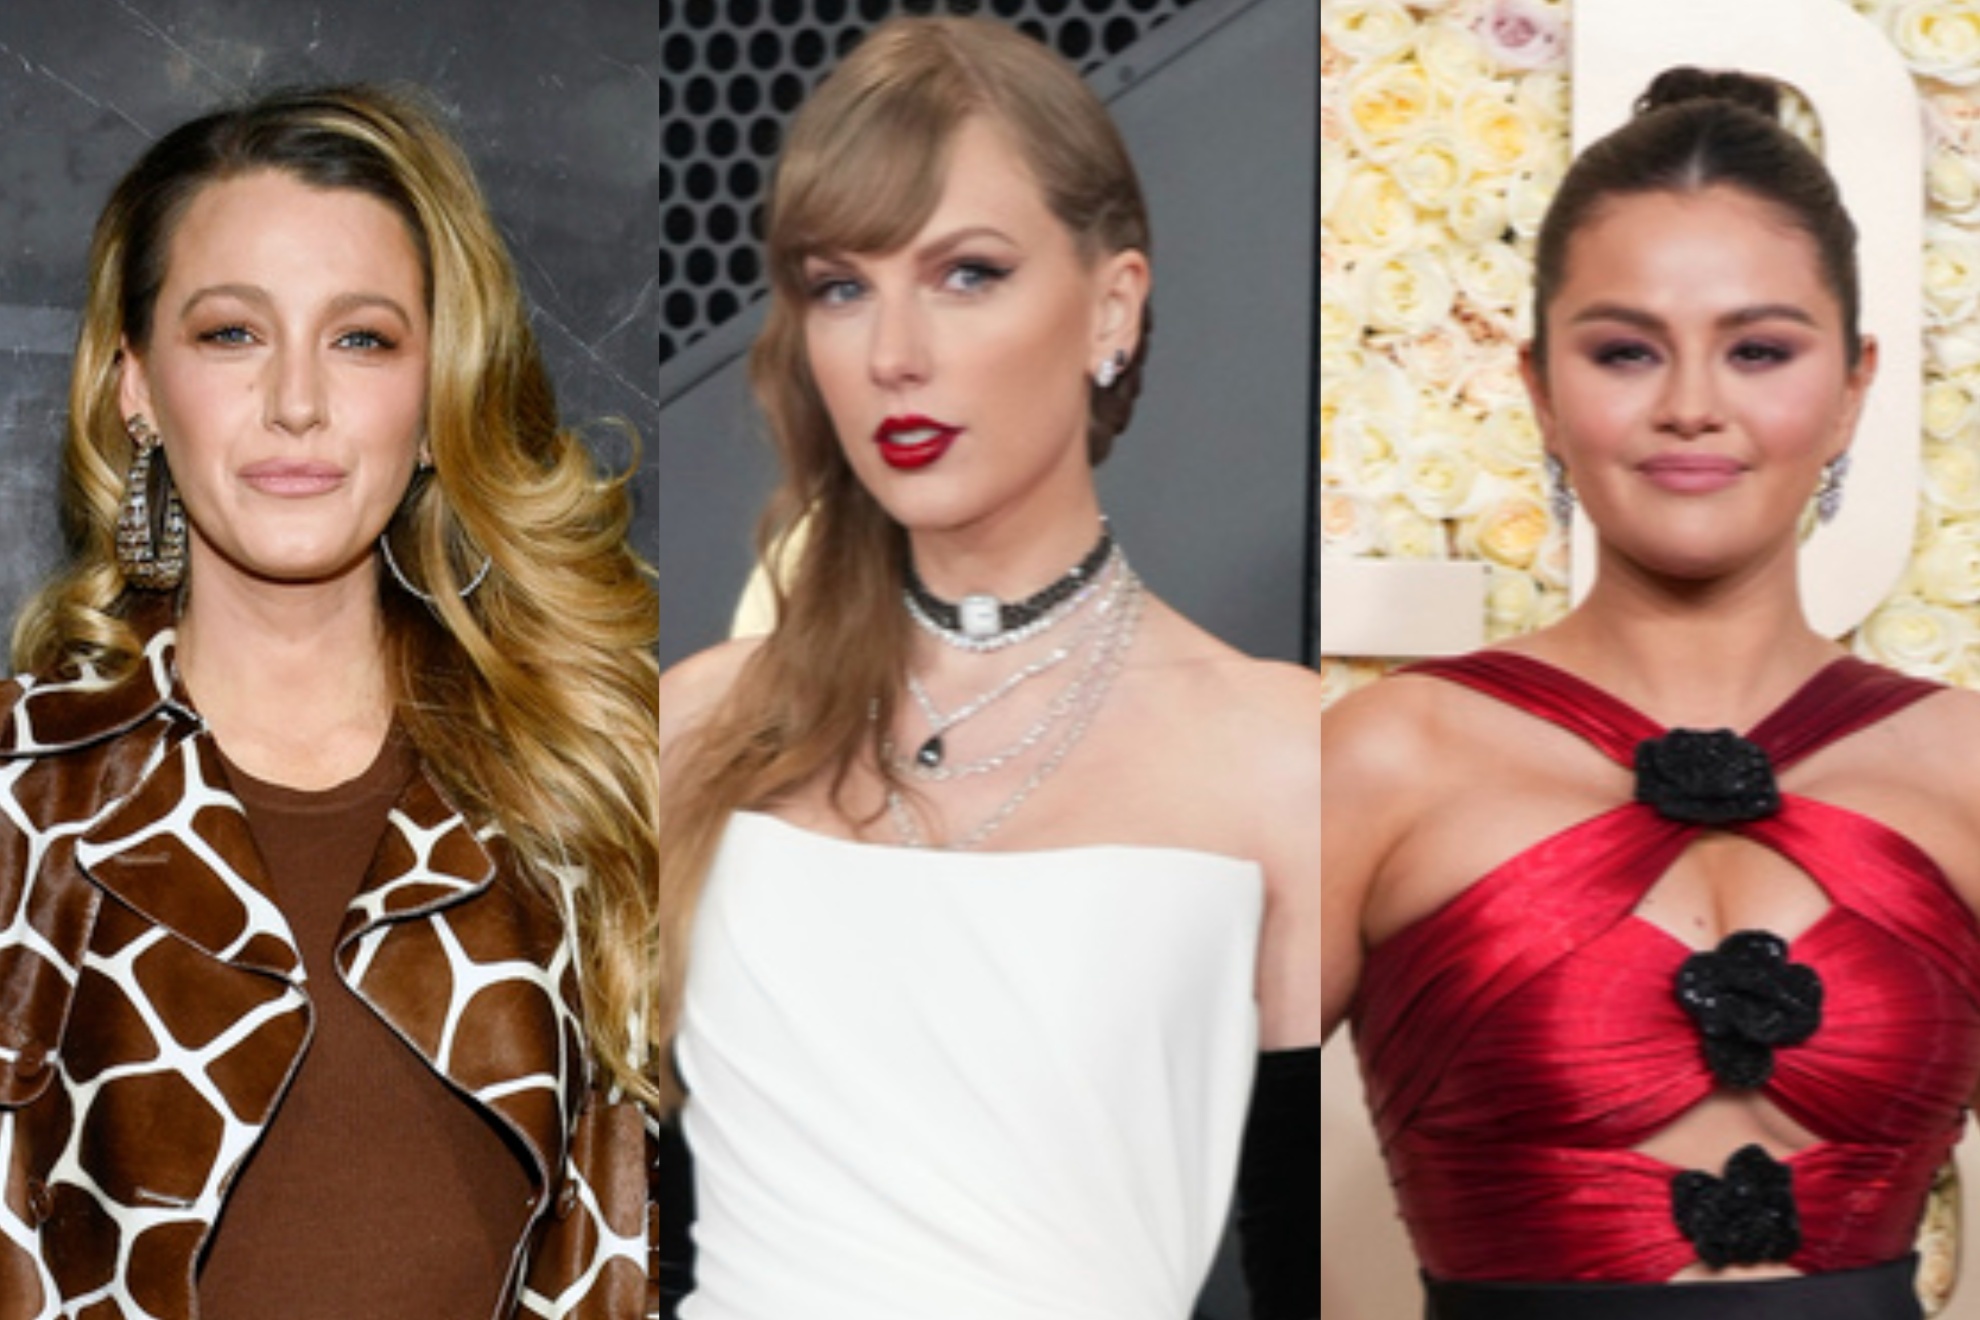 Blake Lively, Taylor Swift and Selena Gomez during recent public appearances